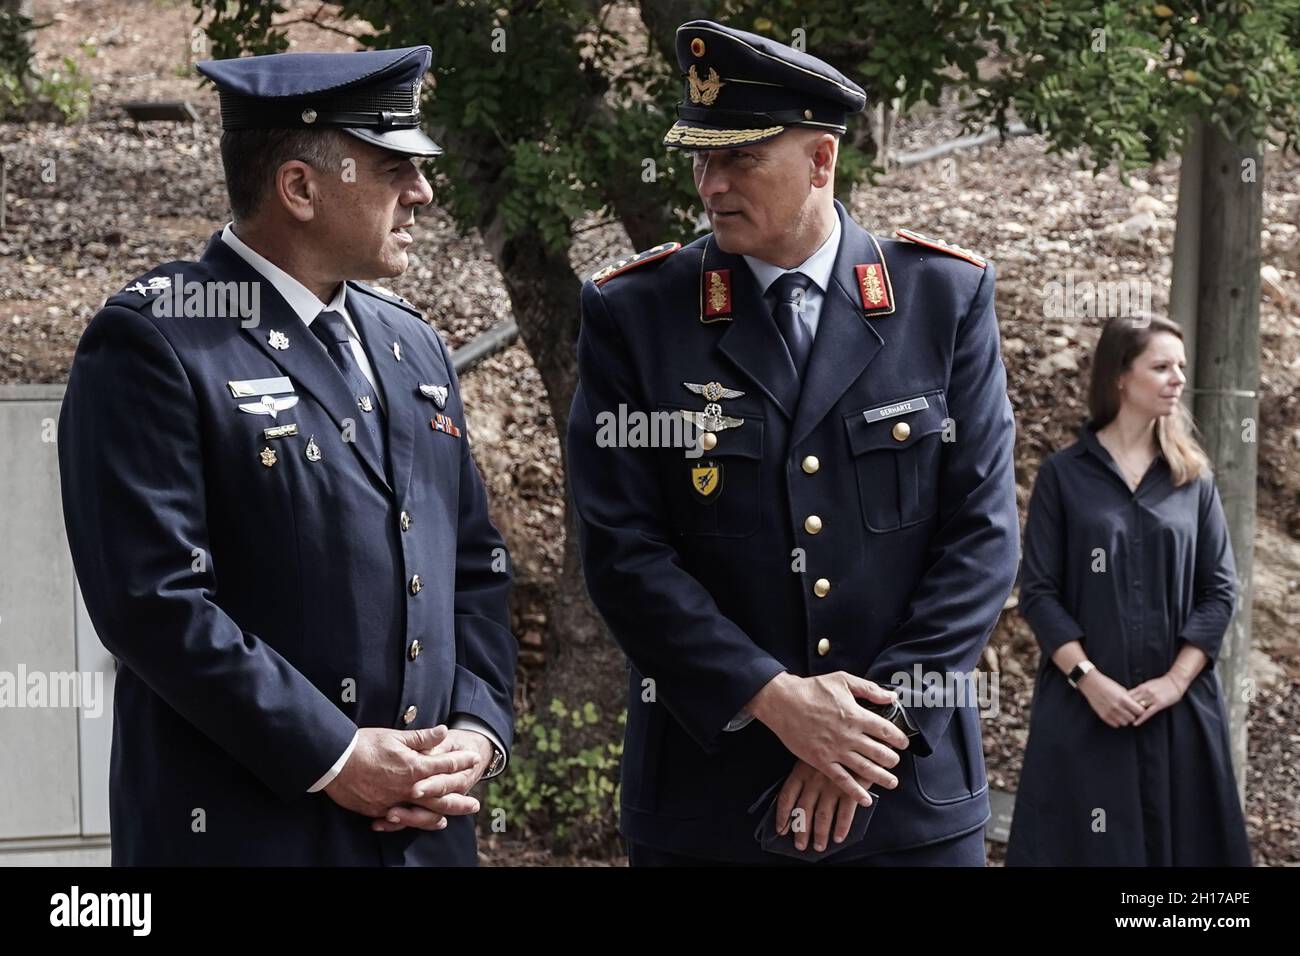 Jerusalem, Israel. 17th October, 2021. Israel Air Force Commander Maj. Gen. AMIKAM NORKIN (L), and counterpart German Luftwaffe Commander Lieutenant General INGO GERHARTZ (R), pay respects by a tree honoring Righteous Among the Nations, airman, Karl Laabs, while on a tour of the Yad Vashem Holocaust Museum prior to the start of the Blue Flag 2021 excersize. The international exercise, considered the largest and most advanced aerial exercise in Israel, takes place with the participation of air forces from Israel, Germany, Italy, Britain, France, India, Greece and the United States. Credit: Nir Stock Photo